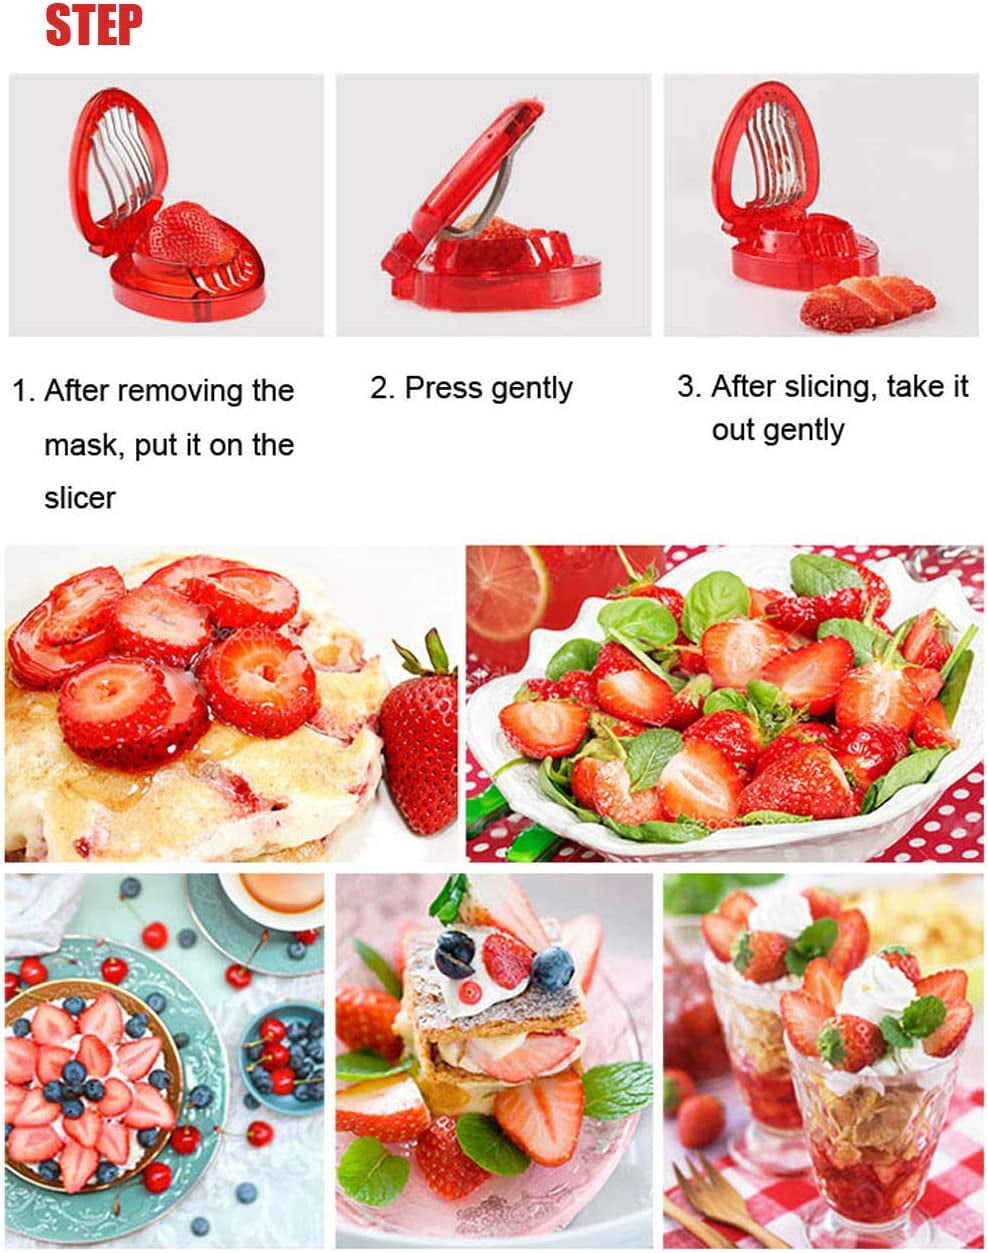 Strawberry Slicer Strawberry Chopper Cut N Cup Strawberry Cutter Fruit &  Vegetable Cut N Cup - China Cut N Cup and Cut N Cup Chop up price